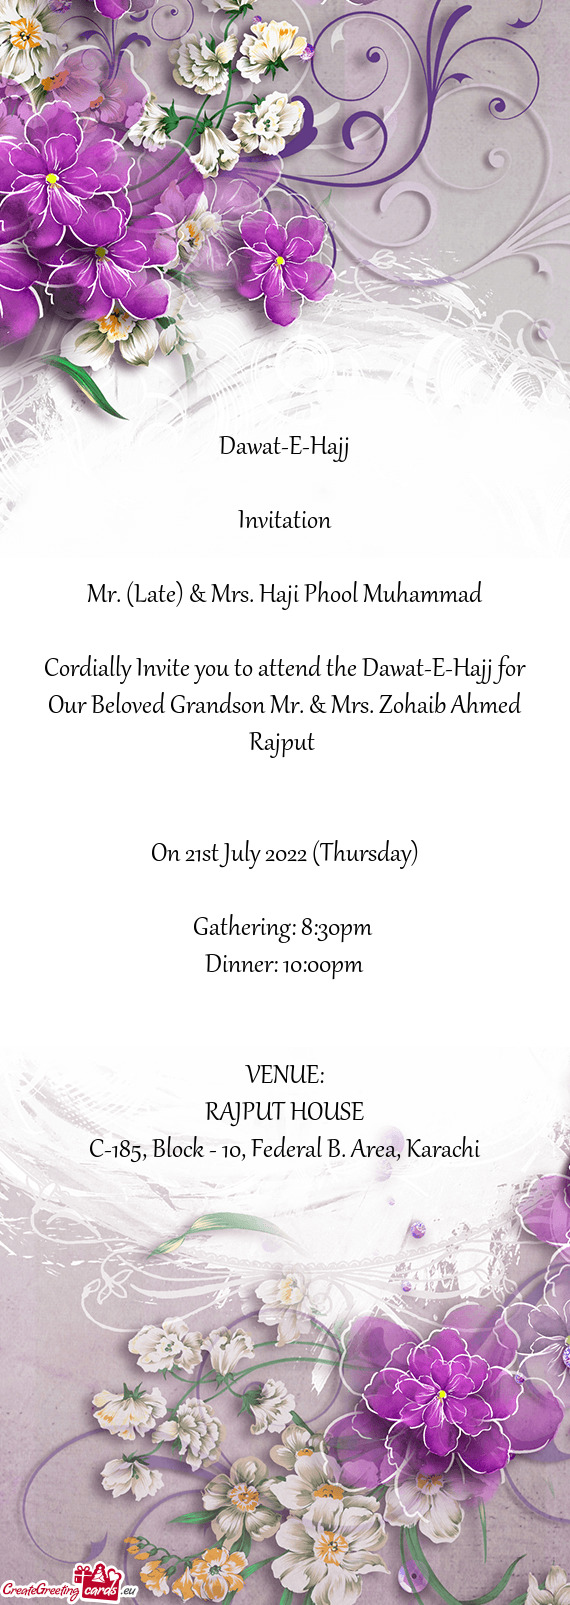 Cordially Invite you to attend the Dawat-E-Hajj for Our Beloved Grandson Mr. & Mrs. Zohaib Ahmed Raj